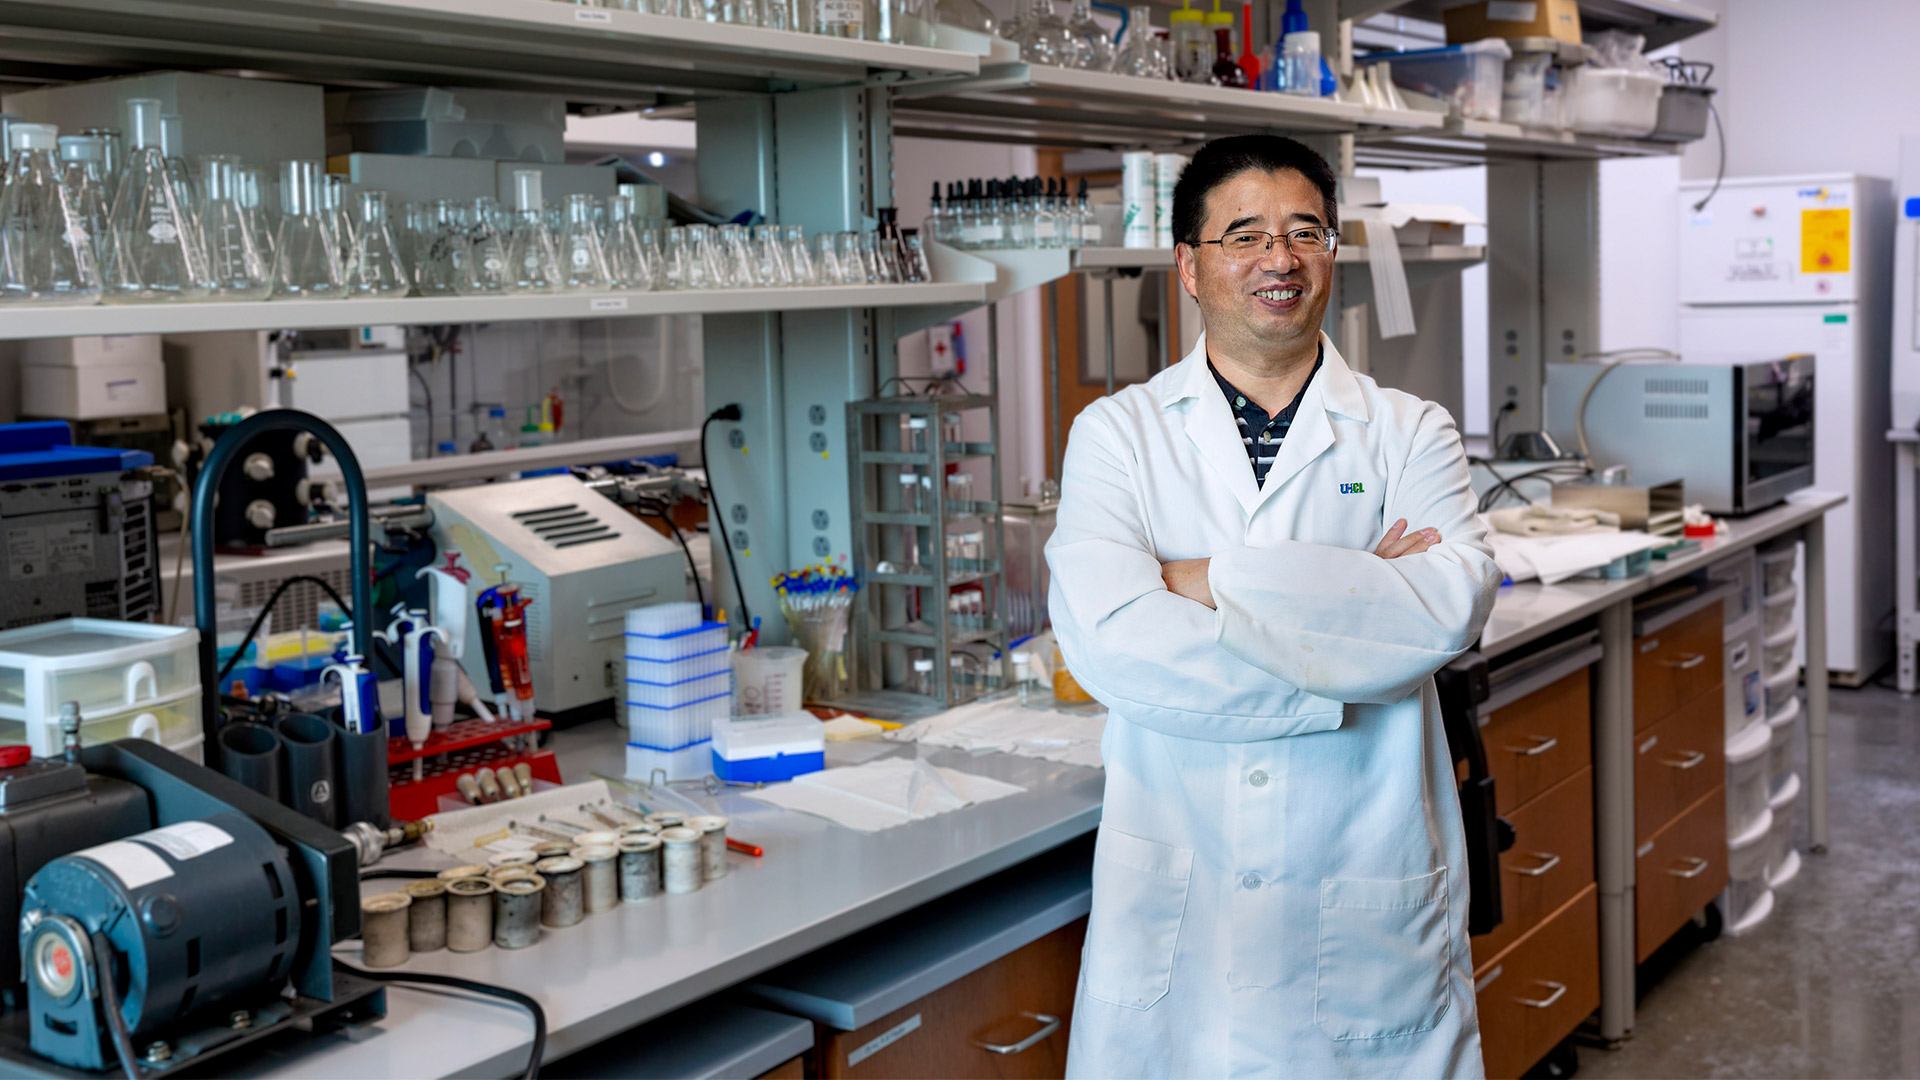 Dr. Daniel Wang in a chemistry laboratory